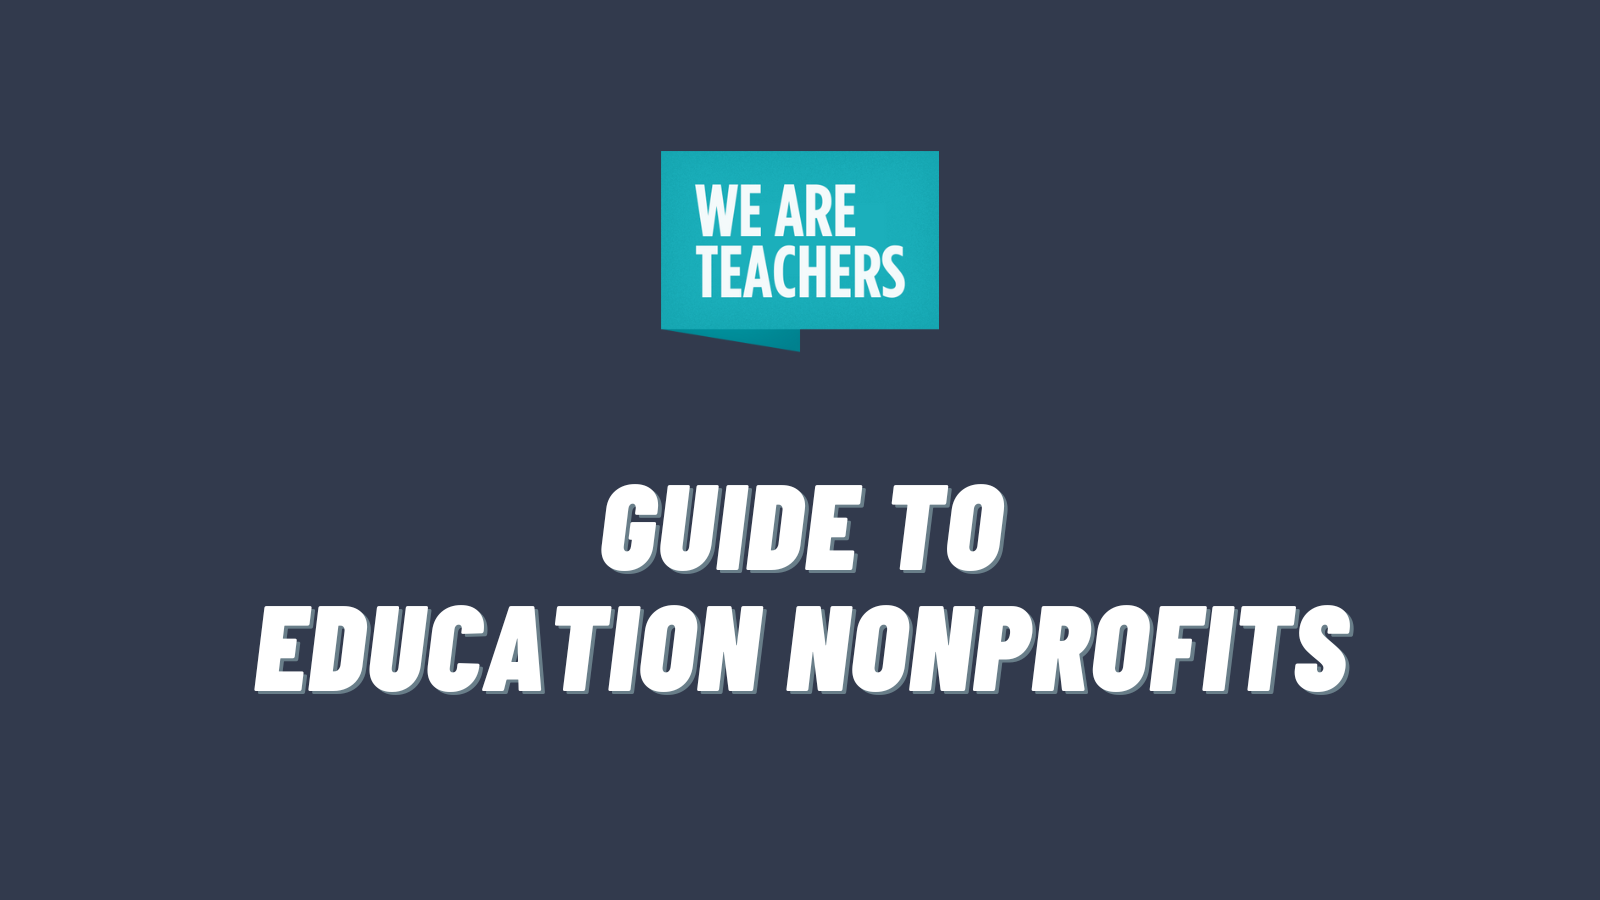 We Are Teachers logo and text that Says Guide to Education Nonprofits.